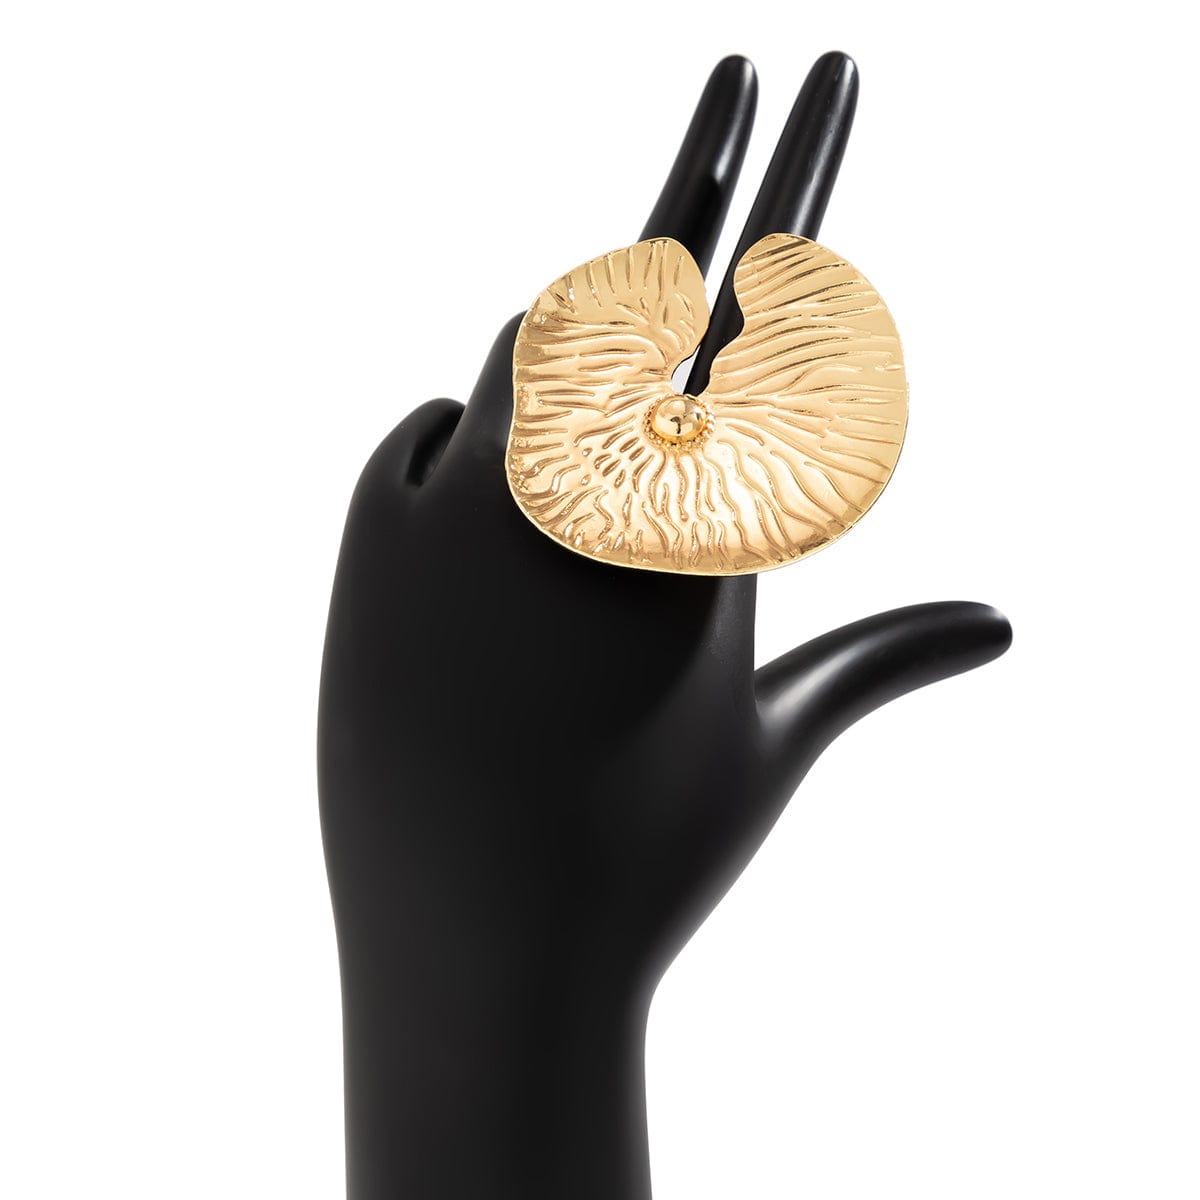 Chic Gold Silver Plated Lotus Leaf Ring - ArtGalleryZen